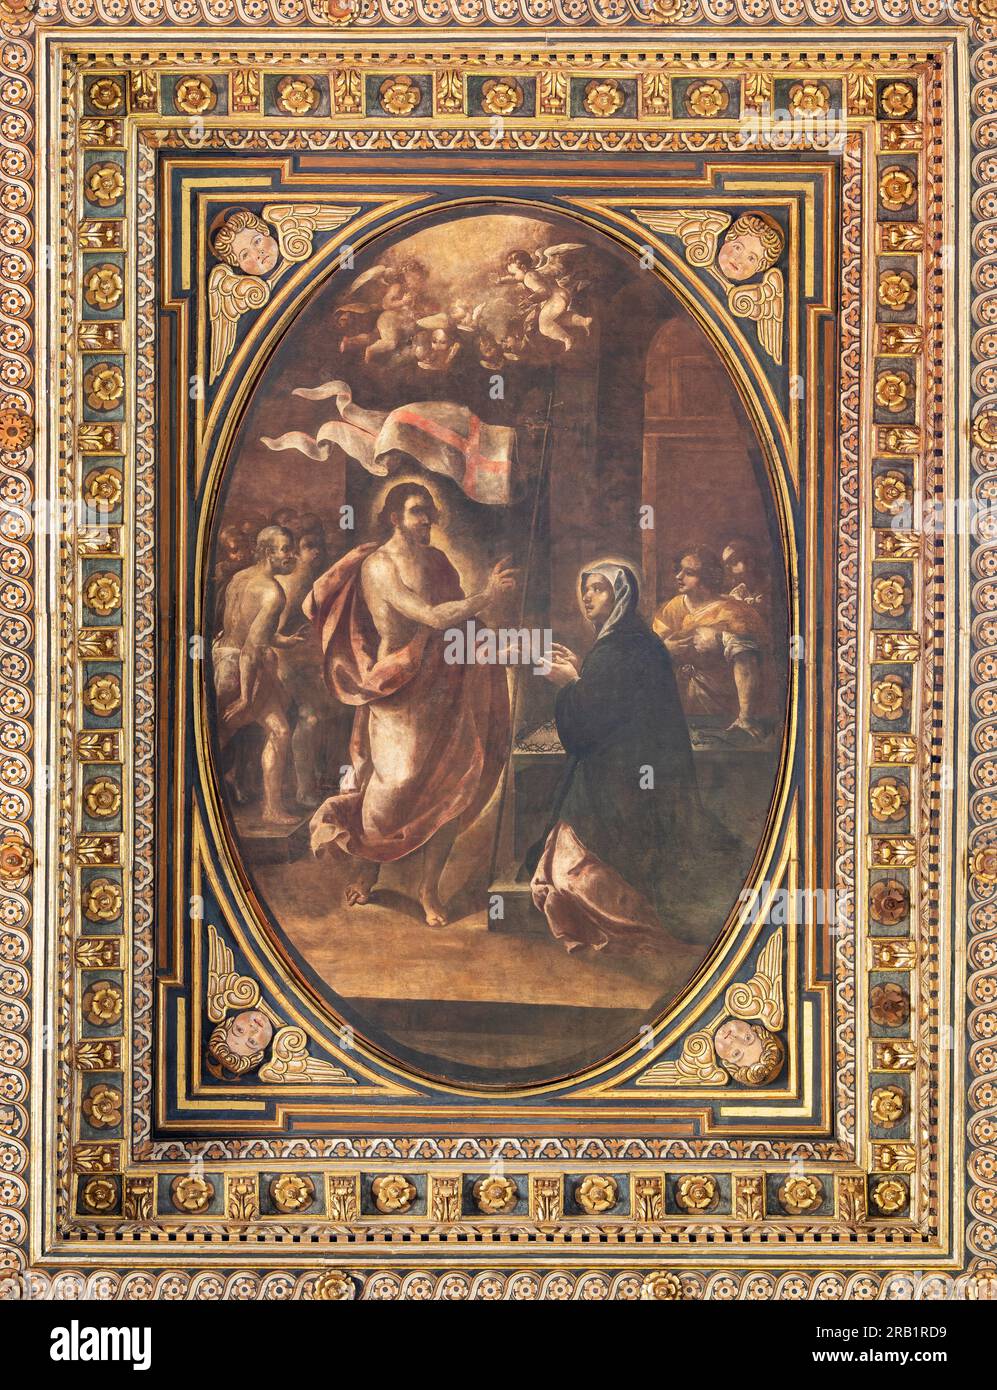 NAPLES, ITALY - APRIL 21, 2023: The painting of Jesus Appears his mother Mary on the ceiling of Cathedral by Giovanni Vincenzo da Forlì (1580 - 1625). Stock Photo